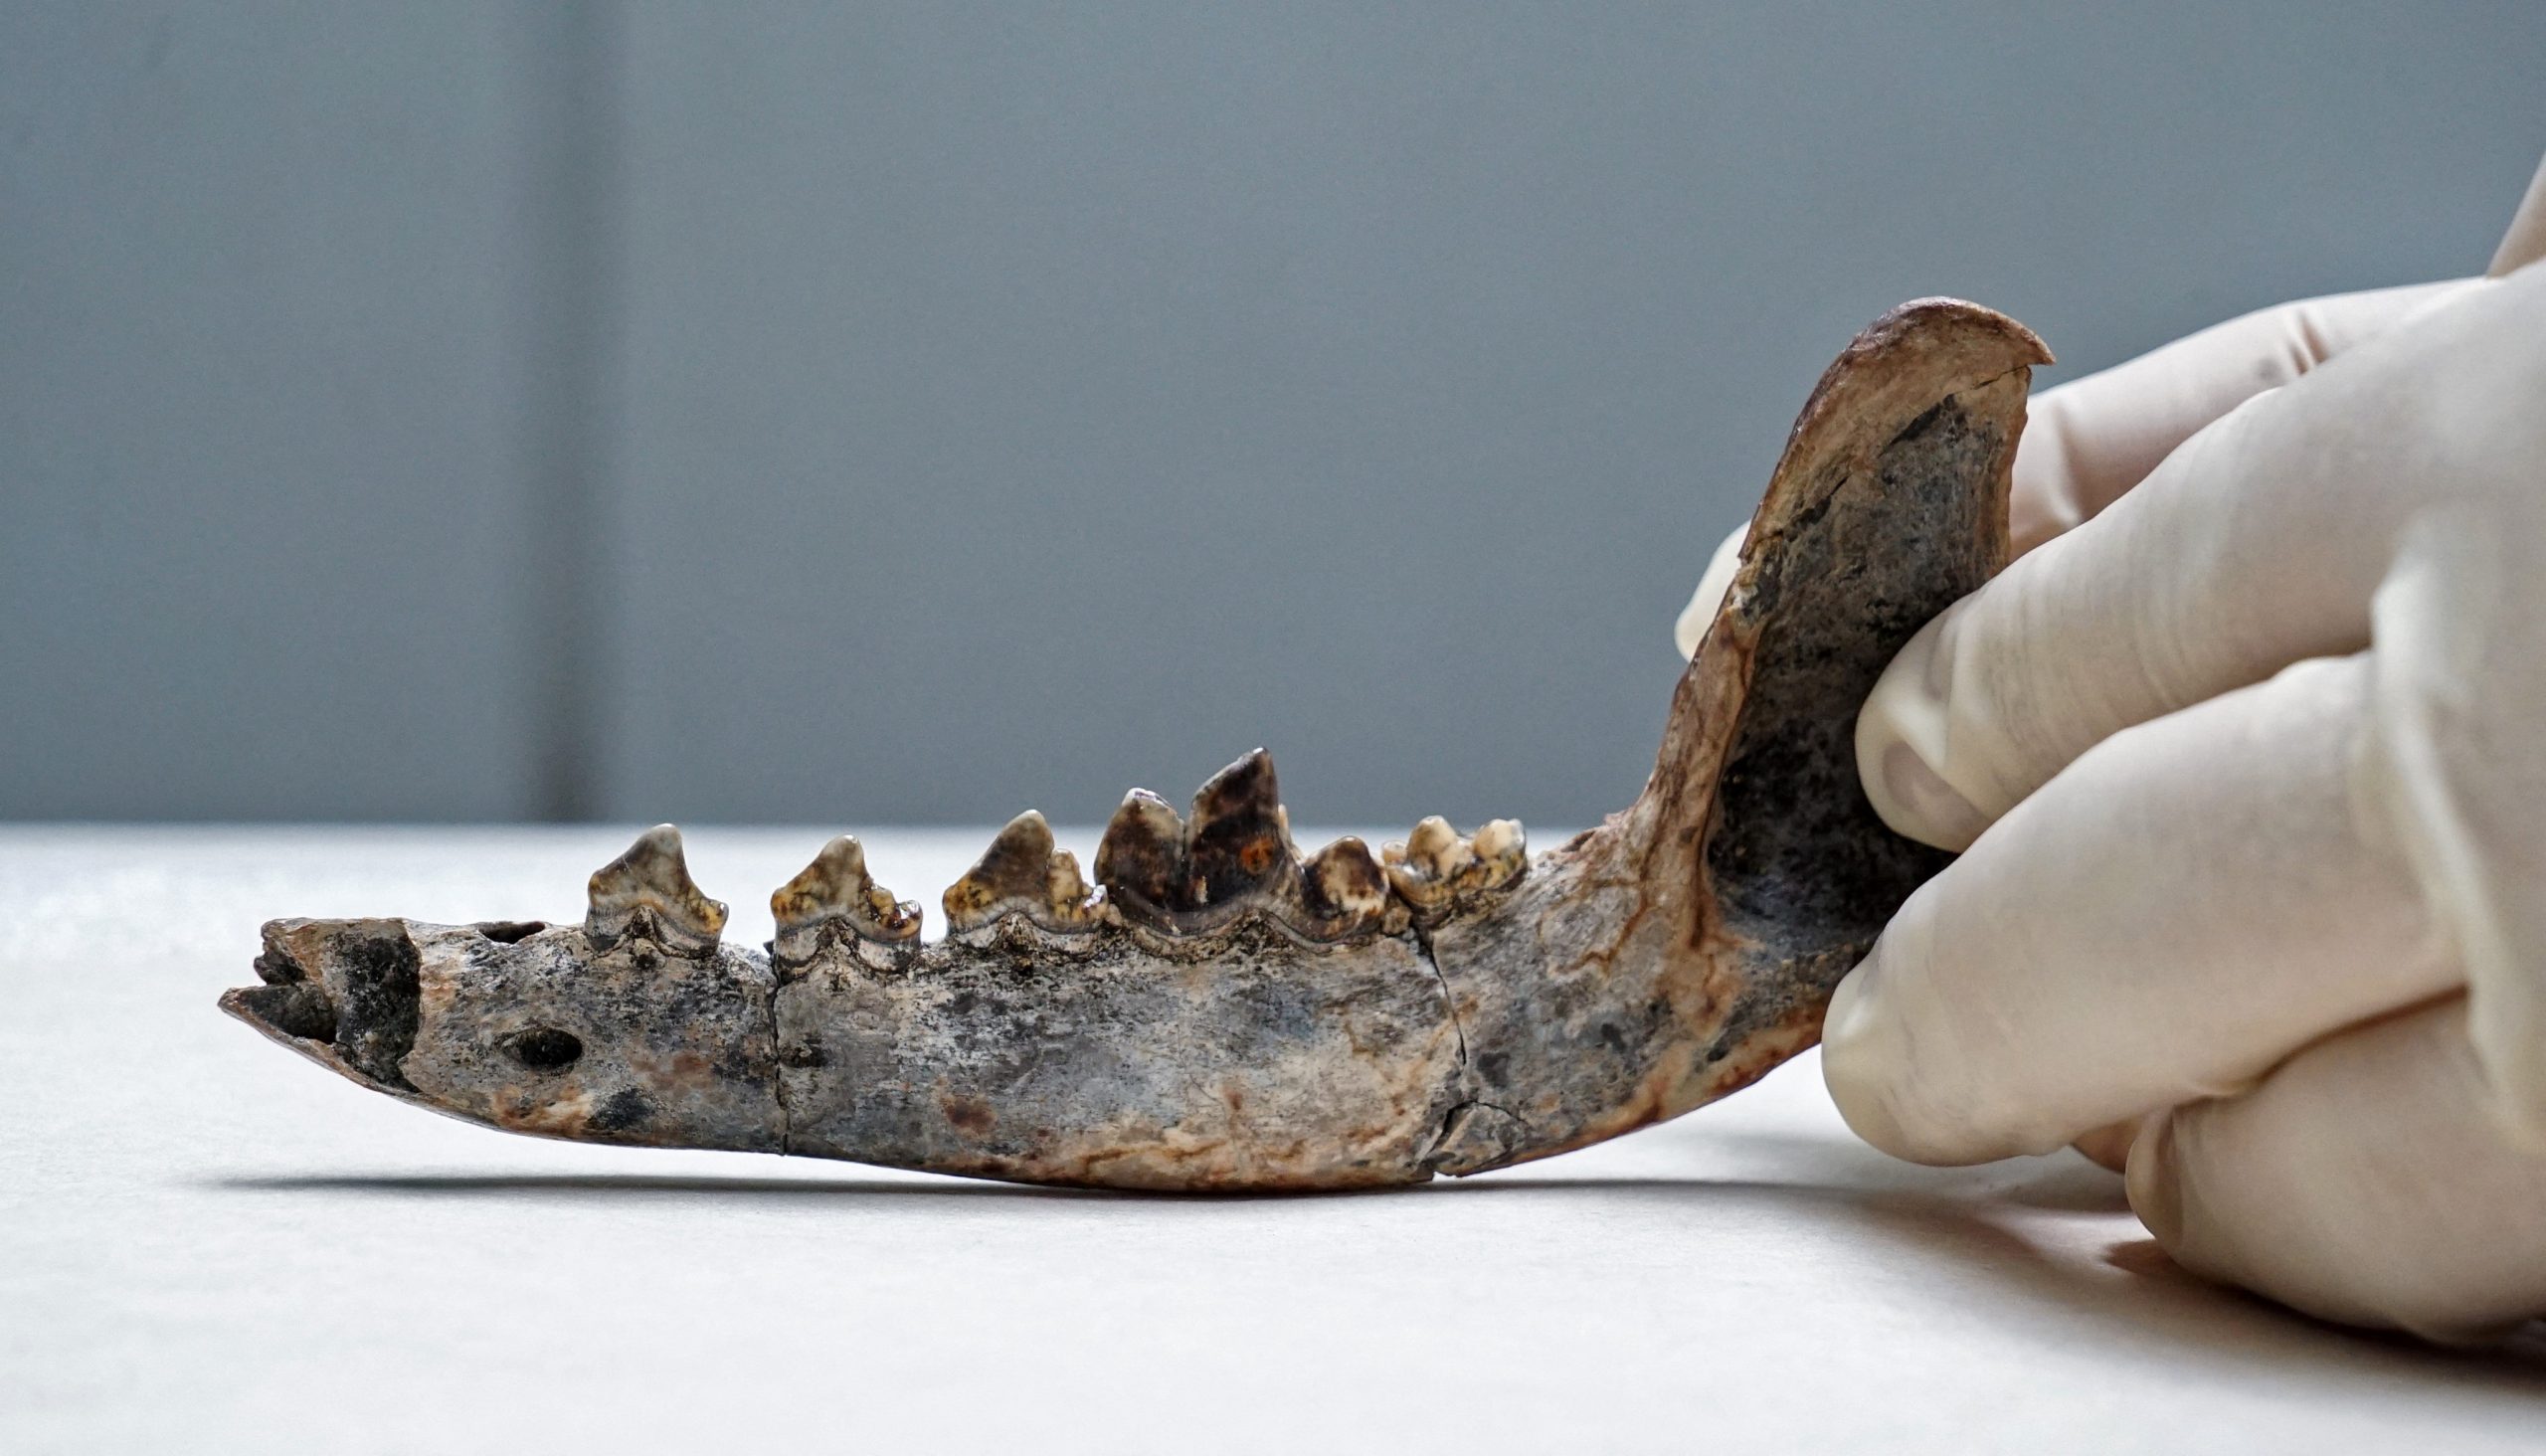 Researchers have found that this jaw fossil could be the oldest dog remains in Central America. Credit: Poyecto Xulo/AFP